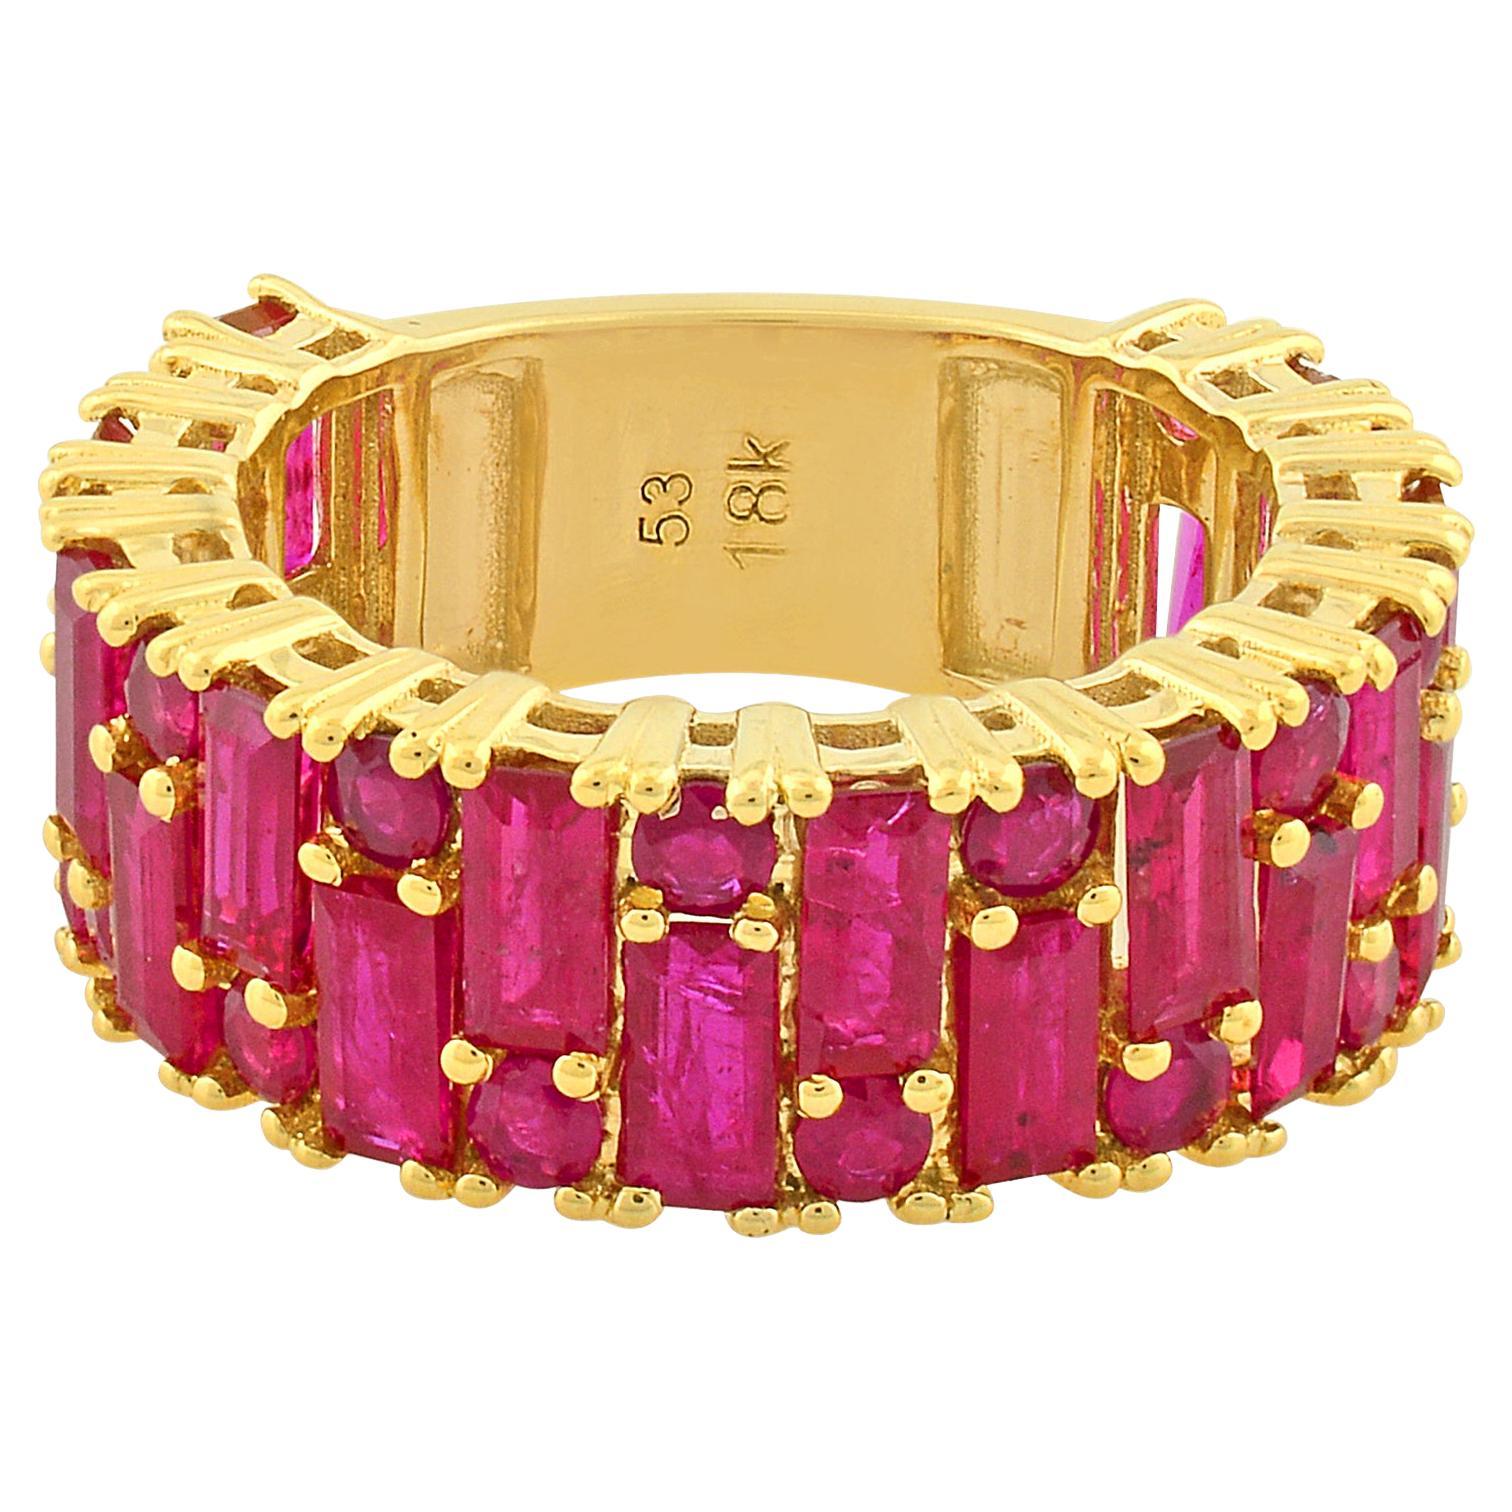 5.76 Carat Ruby Gemstone Band Ring Solid 18k Yellow Gold Handmade Fine Jewelry For Sale